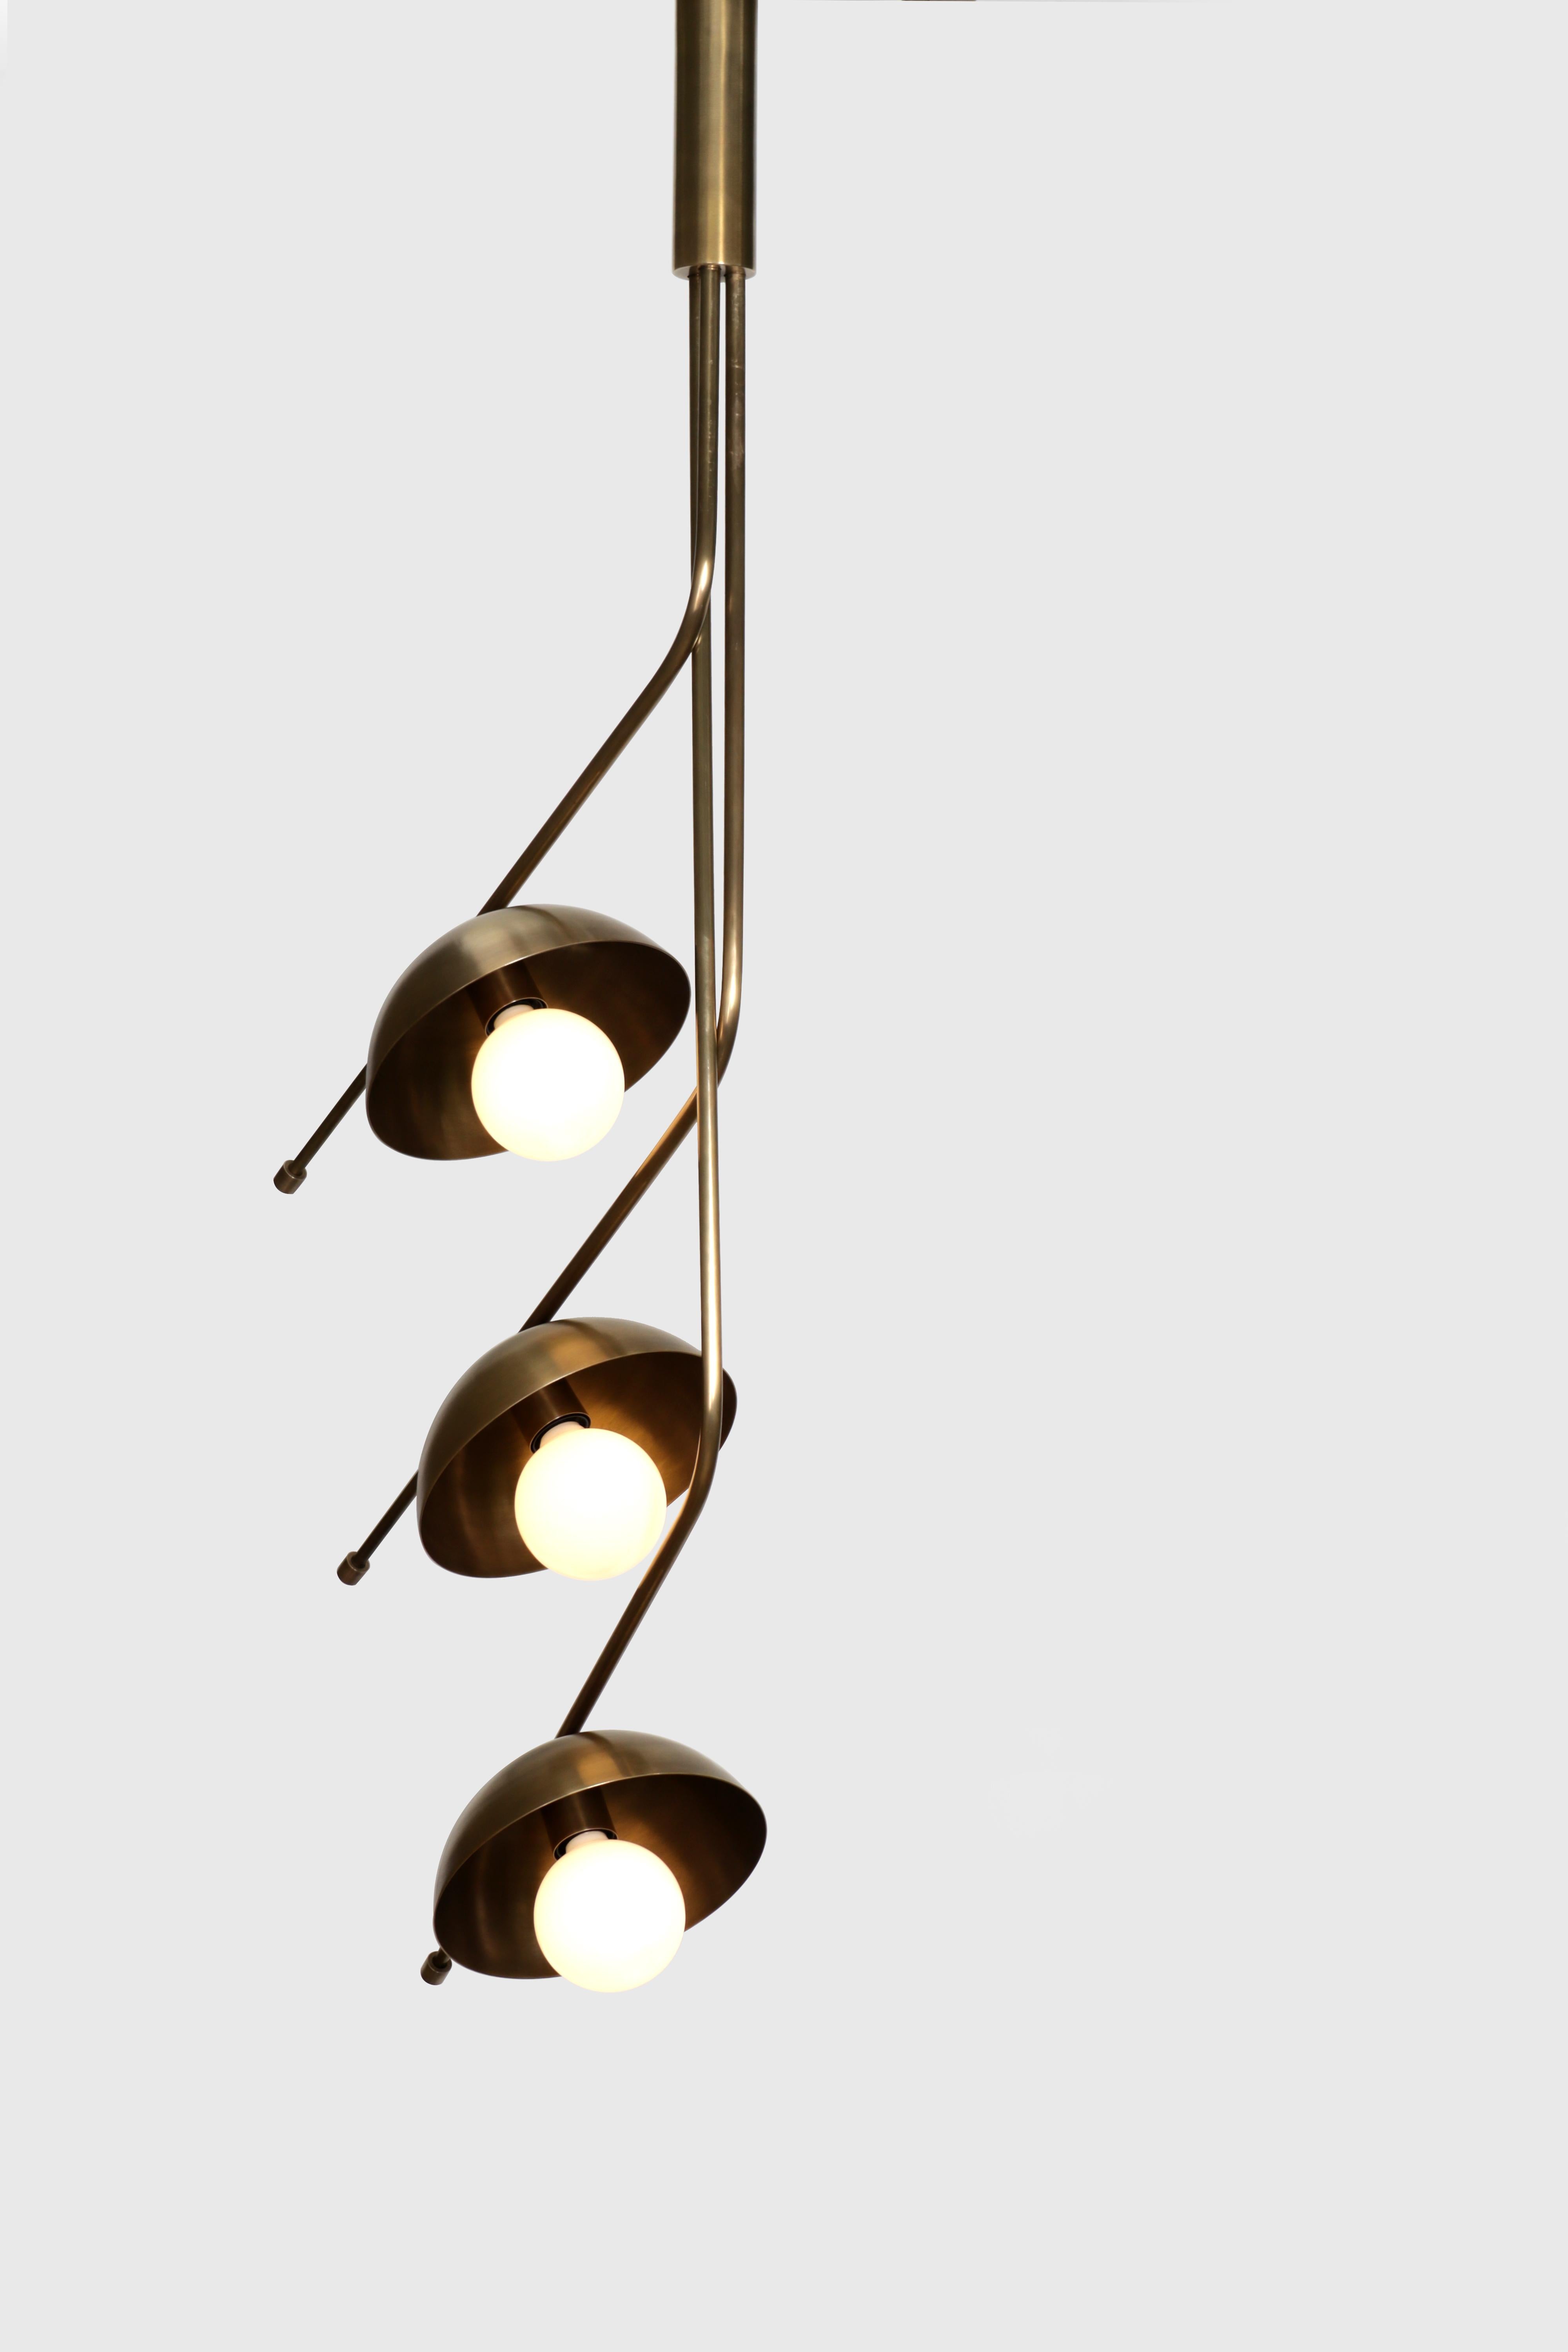 Other Wing 3 Brass Dome Pendant Lamp by Lamp Shaper For Sale